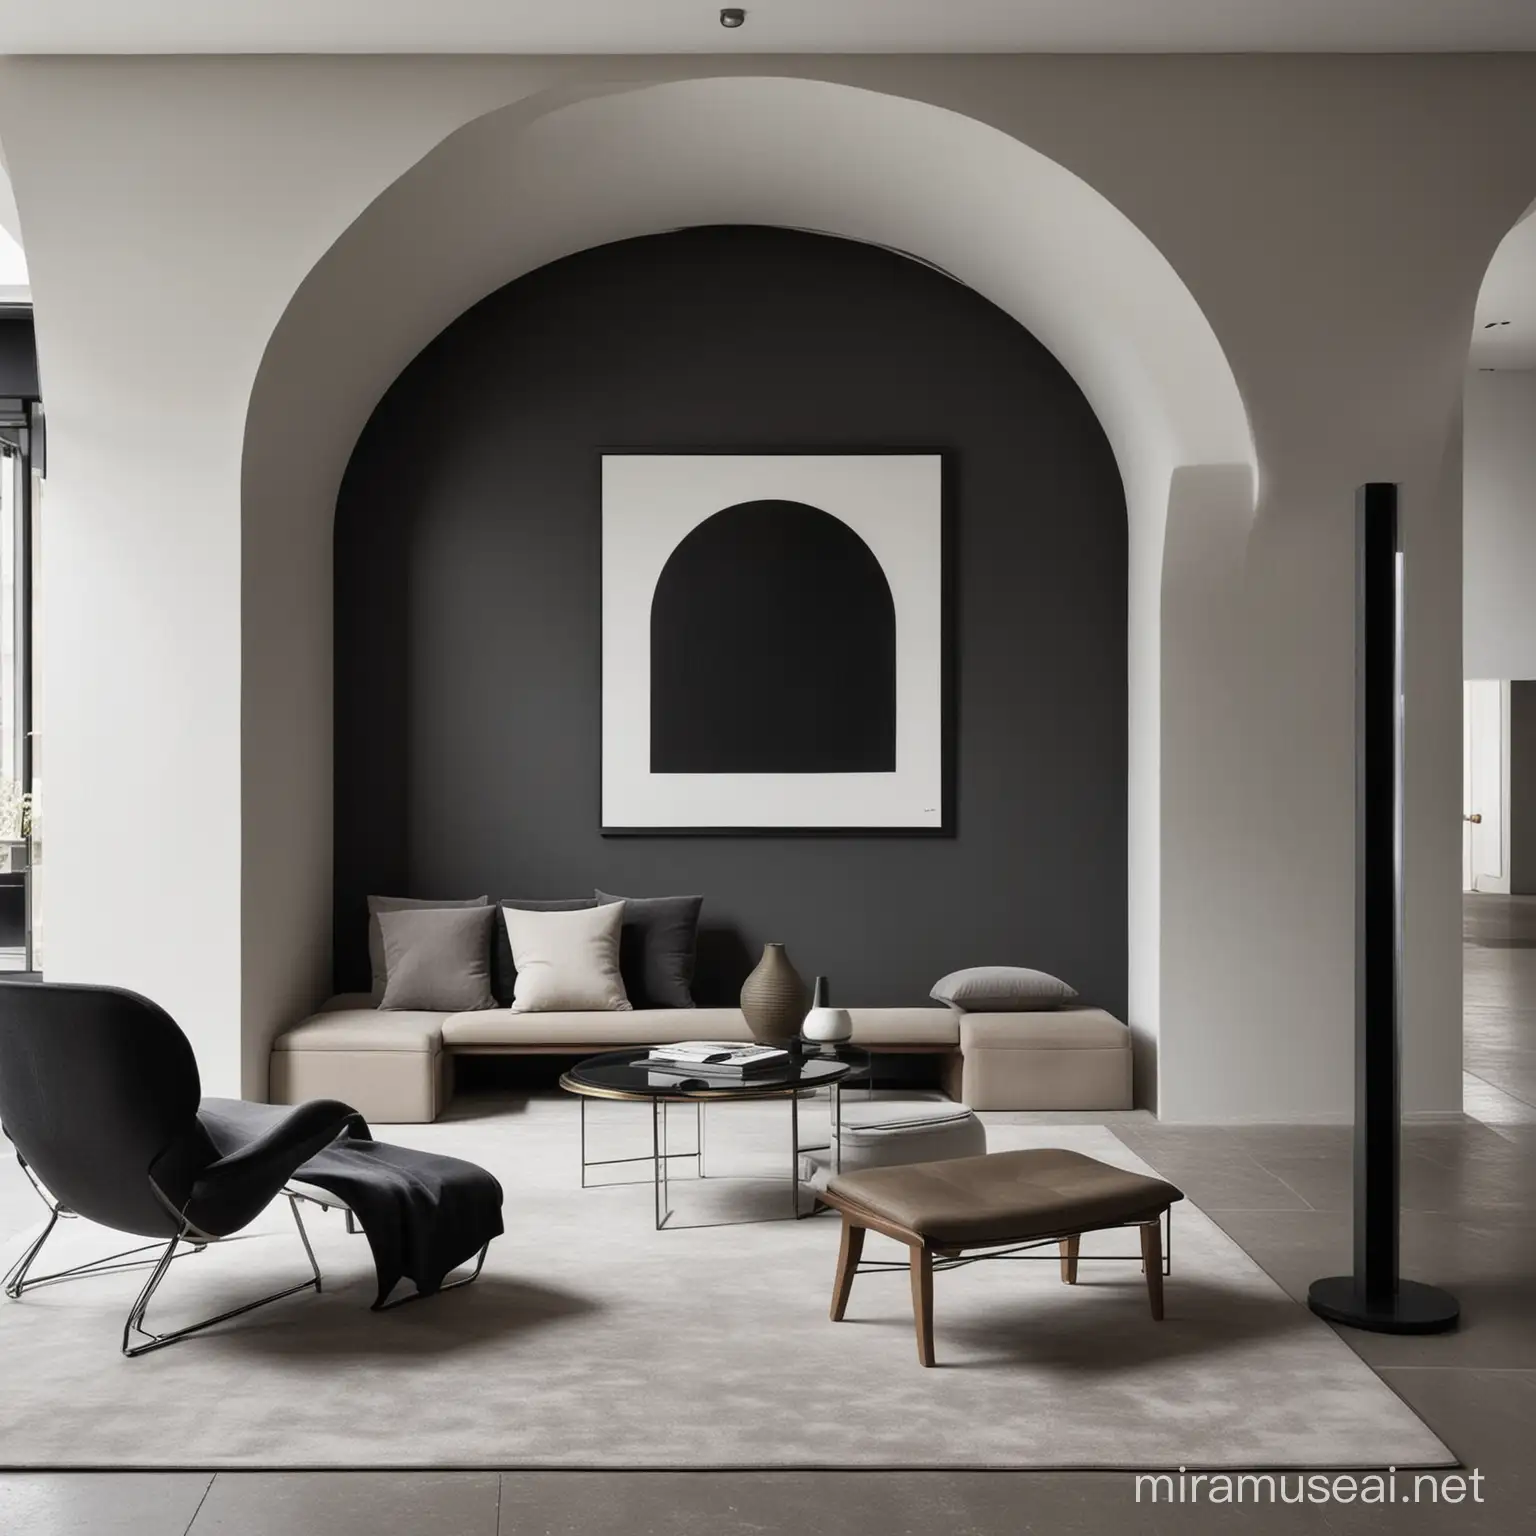 #greyblack walls #artwork #arch #interiores #ad #parisstyle #vladimirkagan #pierrejeanneret #charlotteperriand #dianaghandourstudio #gubiofficial #paulinpaulinpaulin #cctapis #atelierfevrier #lecorbusier #archlovers #architecturedesigr #theinvisiblecollection #nycphotographer #nycvibes #parisvibes #londonvibes #artgallery #quotesaboutlife #artist #interiordecoration #cassina #tacchini 